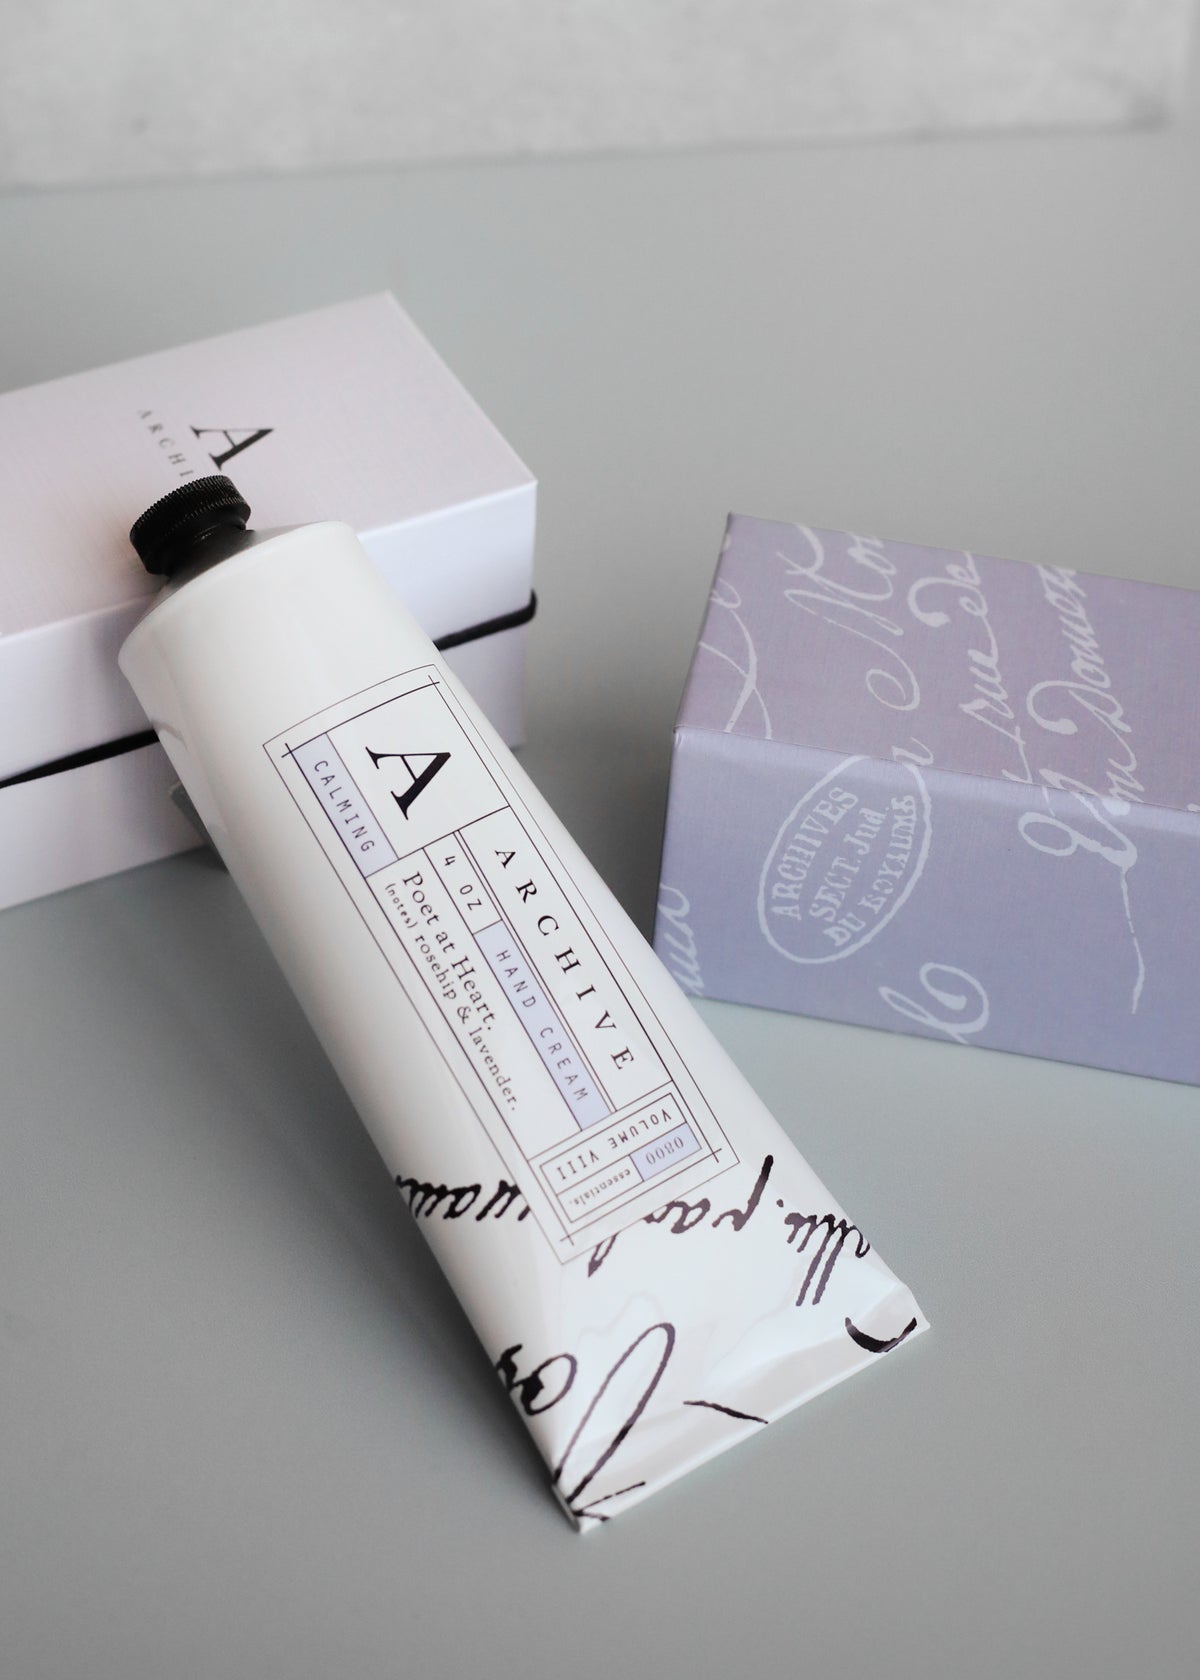 An elegant nourishing Poet at Heart Hand Cream tube by Margot Elena on a gray surface next to two neatly stacked light-colored boxes with cursive text. The tube displays a minimalist black and white design with the letter "a" prominent.